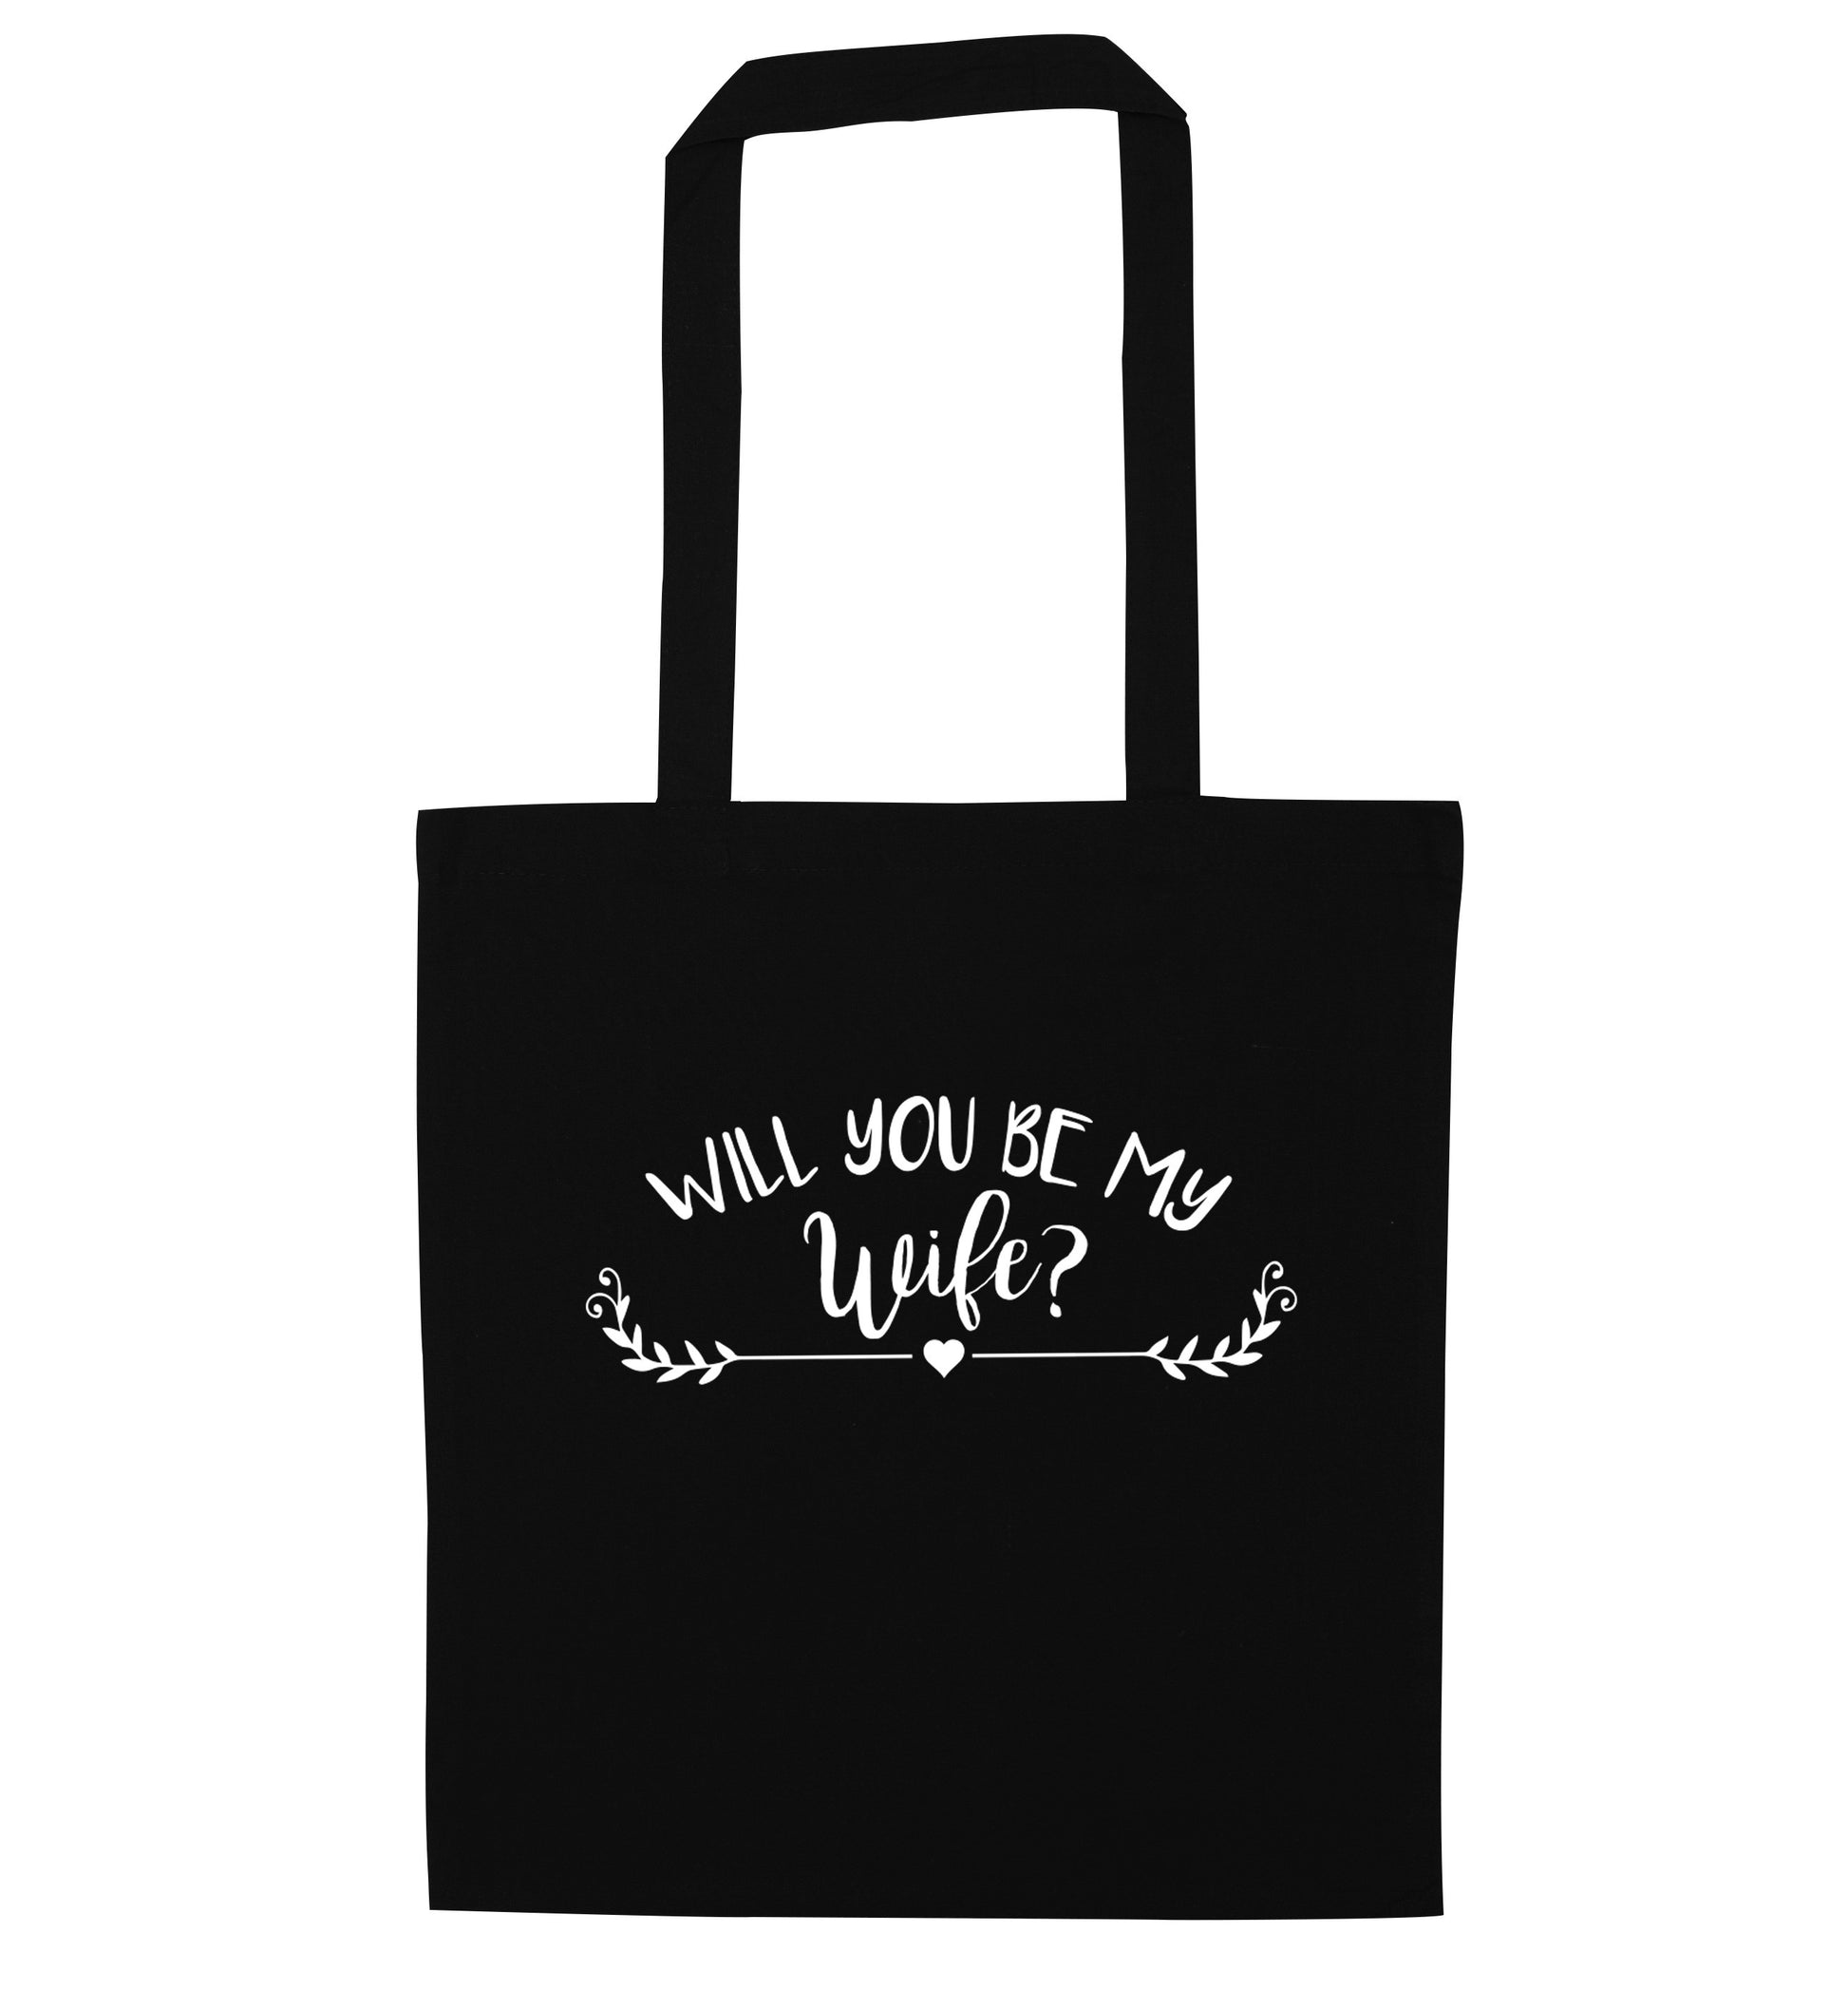 Will you be my wife? black tote bag